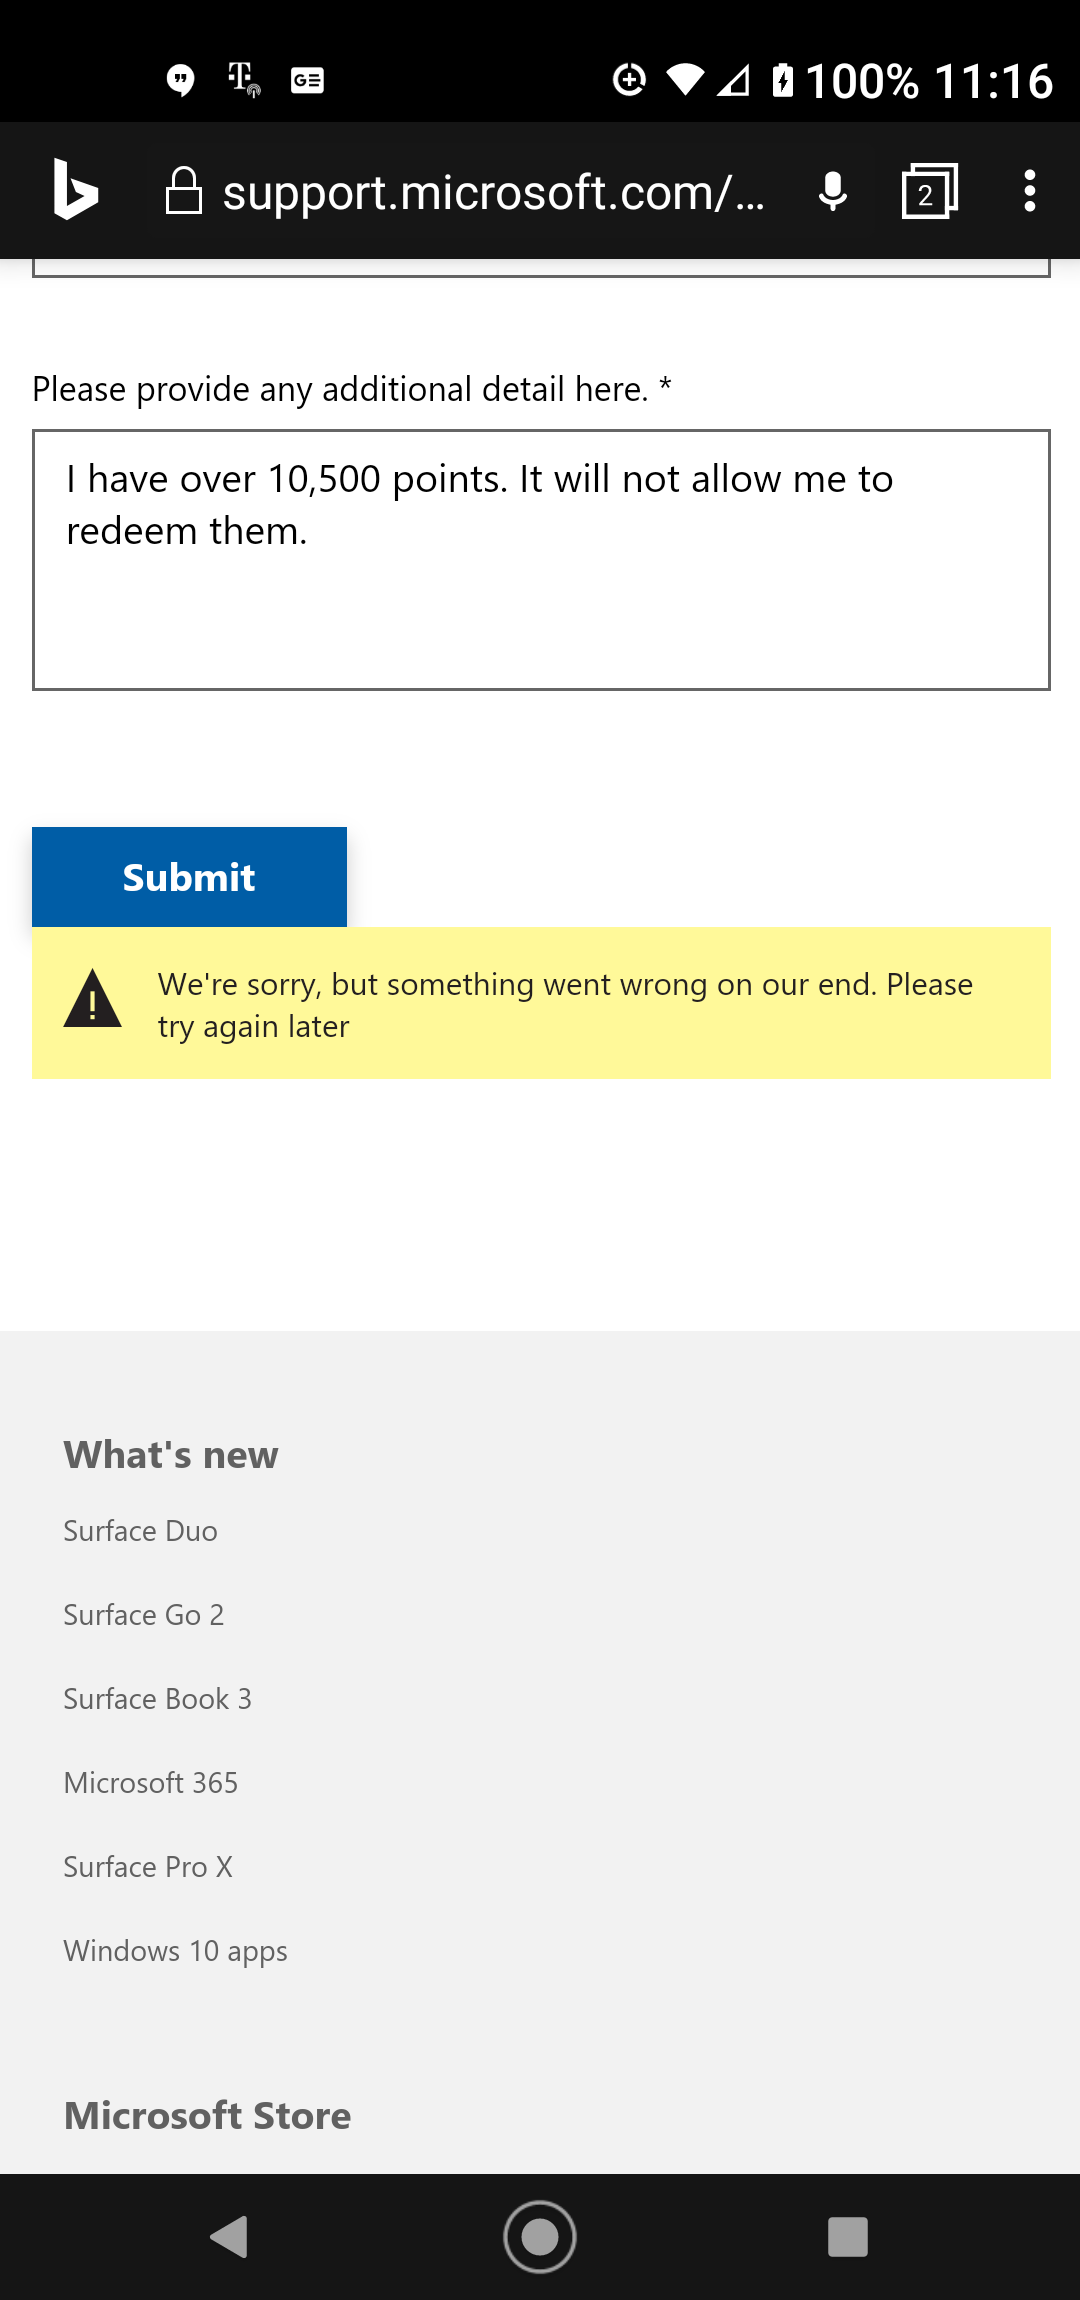 Robux Removed From MicroSoft Rewards, Why and When are they coming -  Microsoft Community